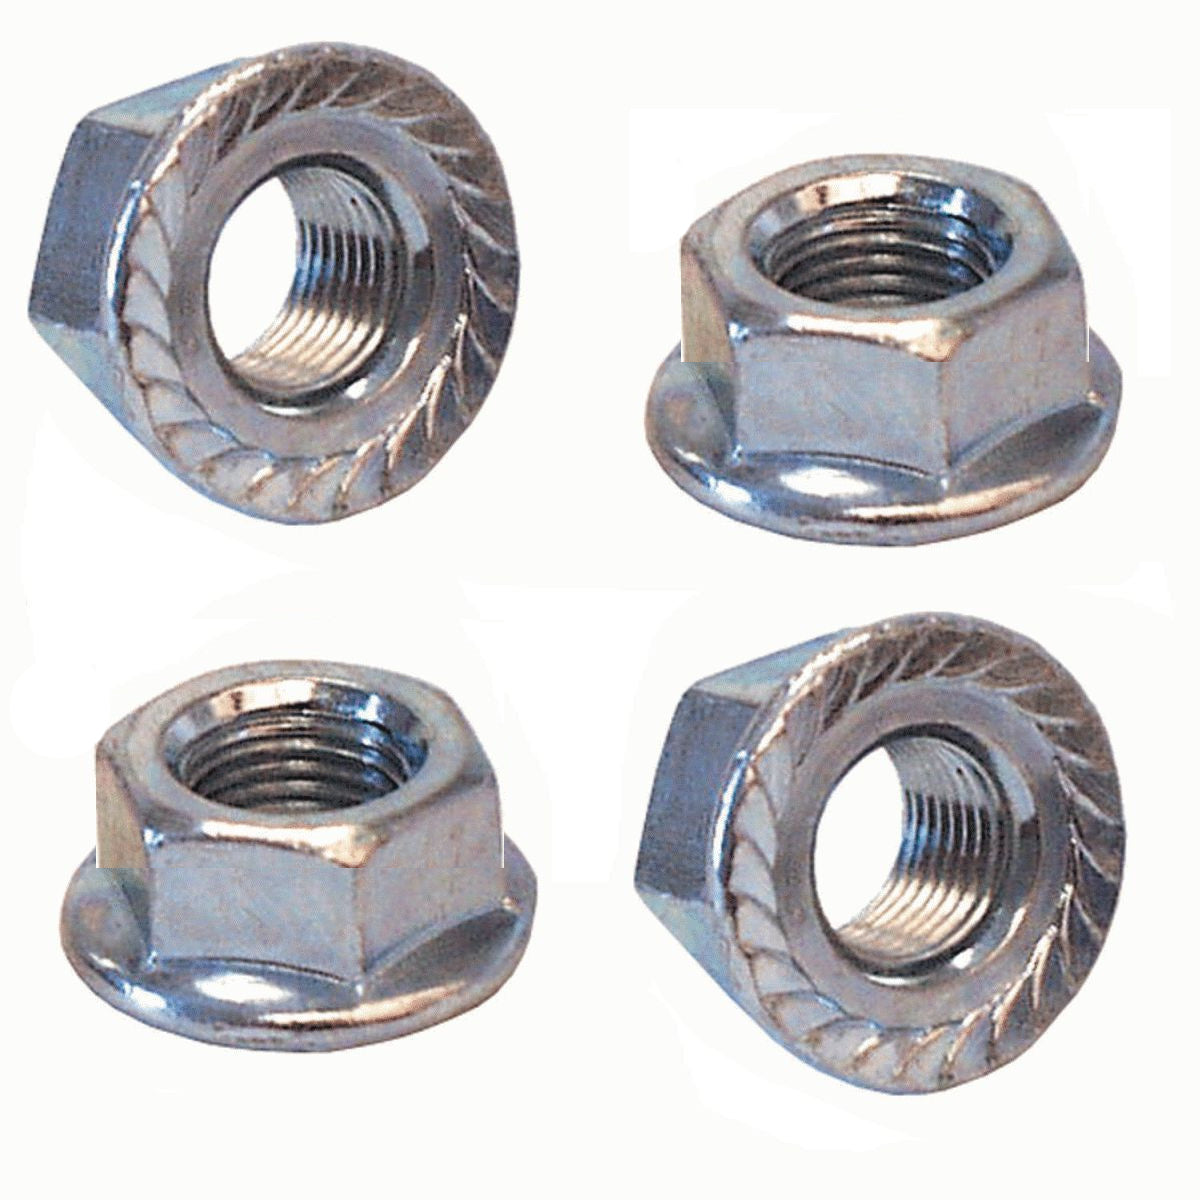 Steel Flanged Axle Nuts 3/8" x 24t Set of 4